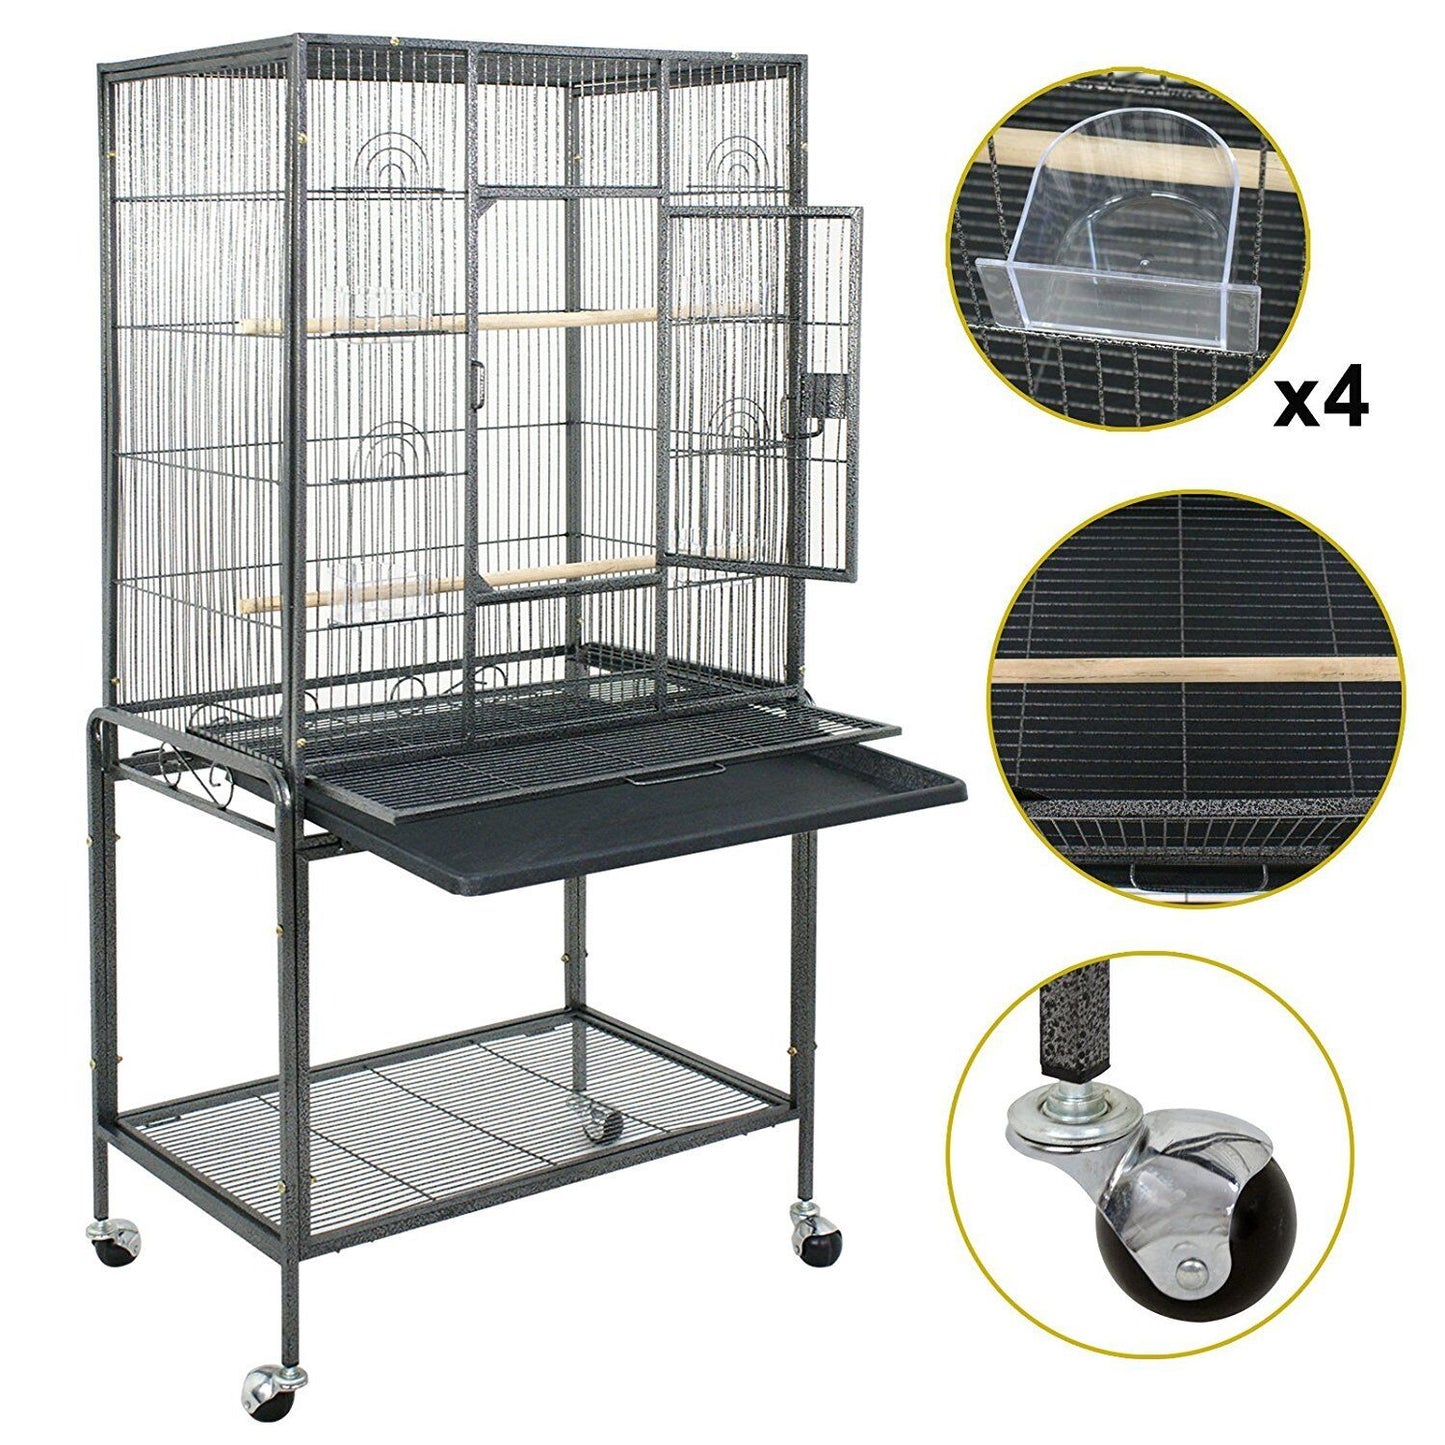 Bird Cage Large Play Top Bird Parrot Finch Cage Macaw Cockatoo Pet Supplies 53"